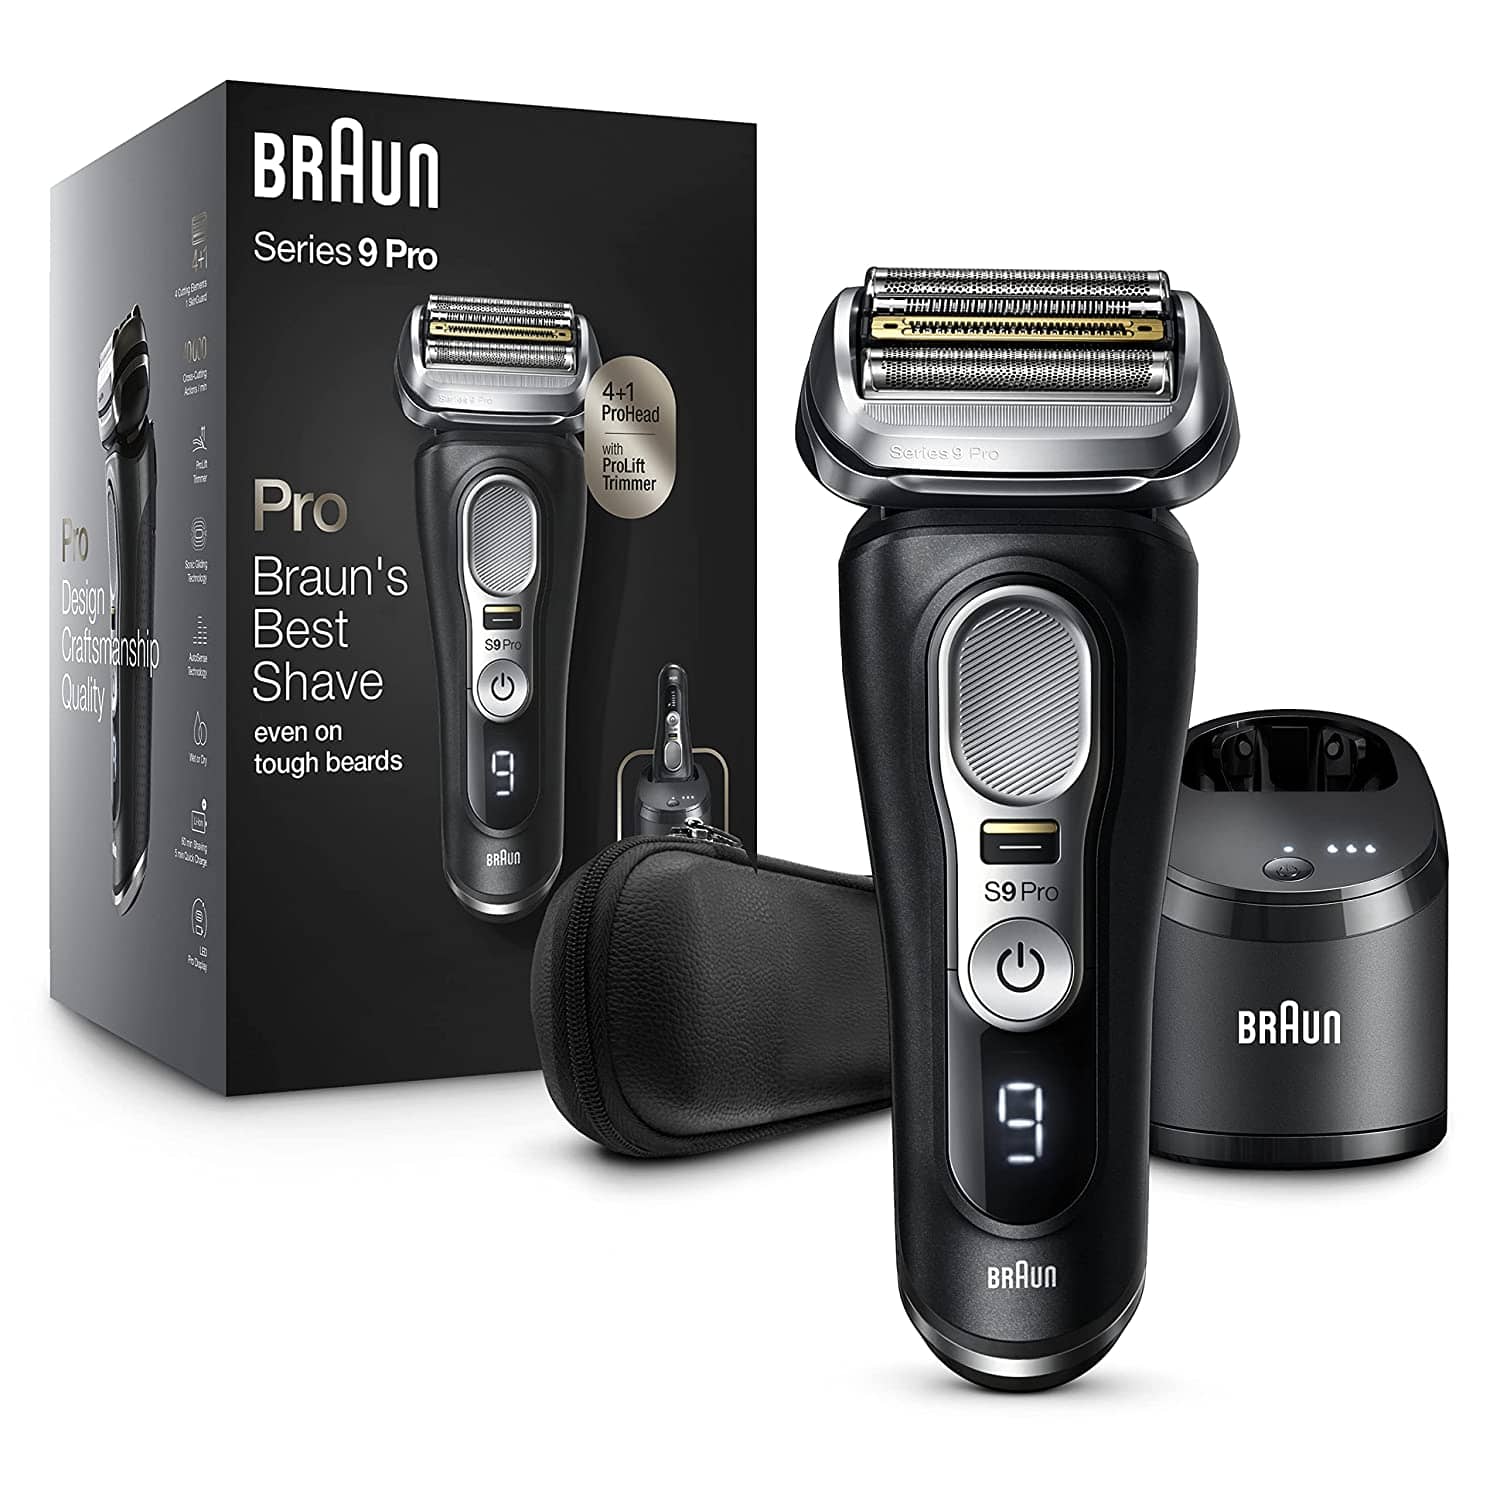 Braun Electric Razor, Waterproof Foil Shaver for Men, Series 9 Pro 9460cc, Wet & Dry Shave, With ProLift Beard Trimmer for Grooming, 5-in-1 Cleaning & Charging SmartCare Center Included, Atelier Black